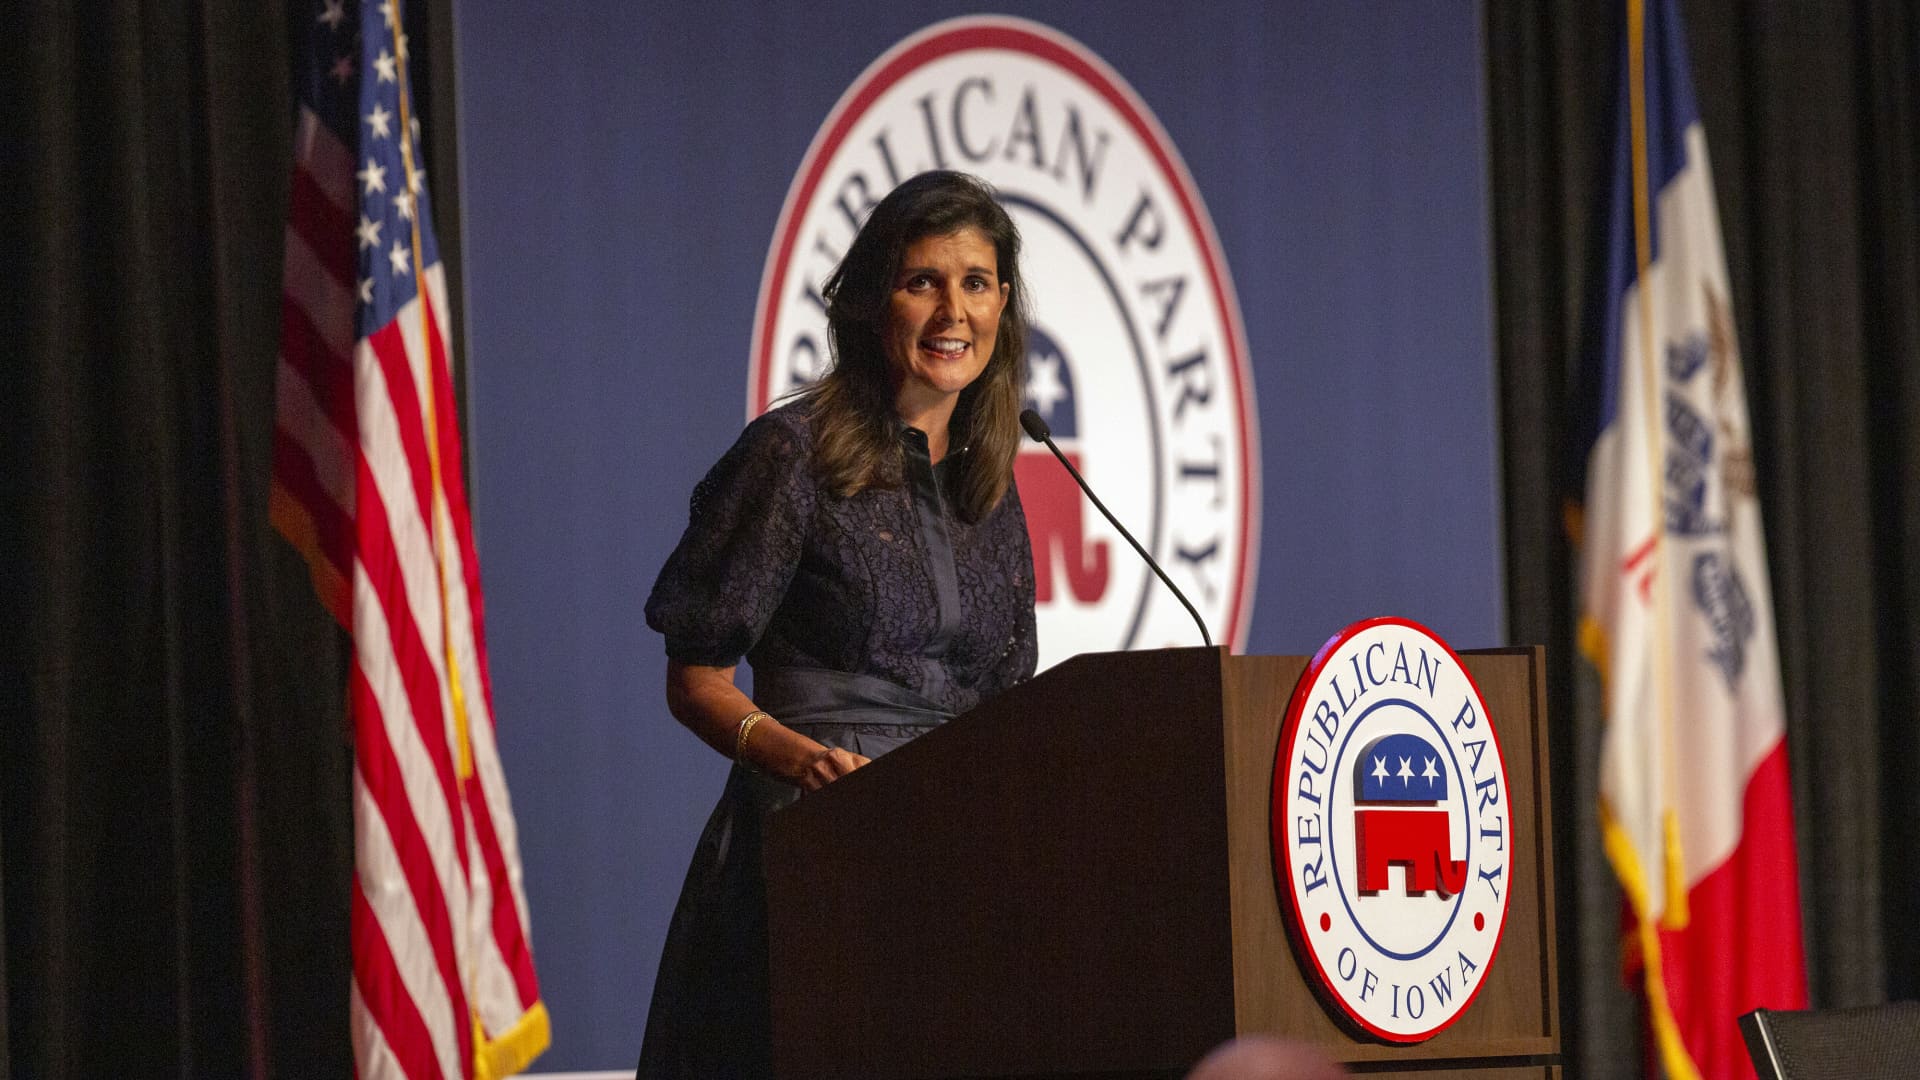 Nikki Haley, former ambassador to the United Nations, speaks during the Iowa GOP Lincoln Dinner in Des Moines, Iowa, U.S., on Thursday, June 24, 2021.